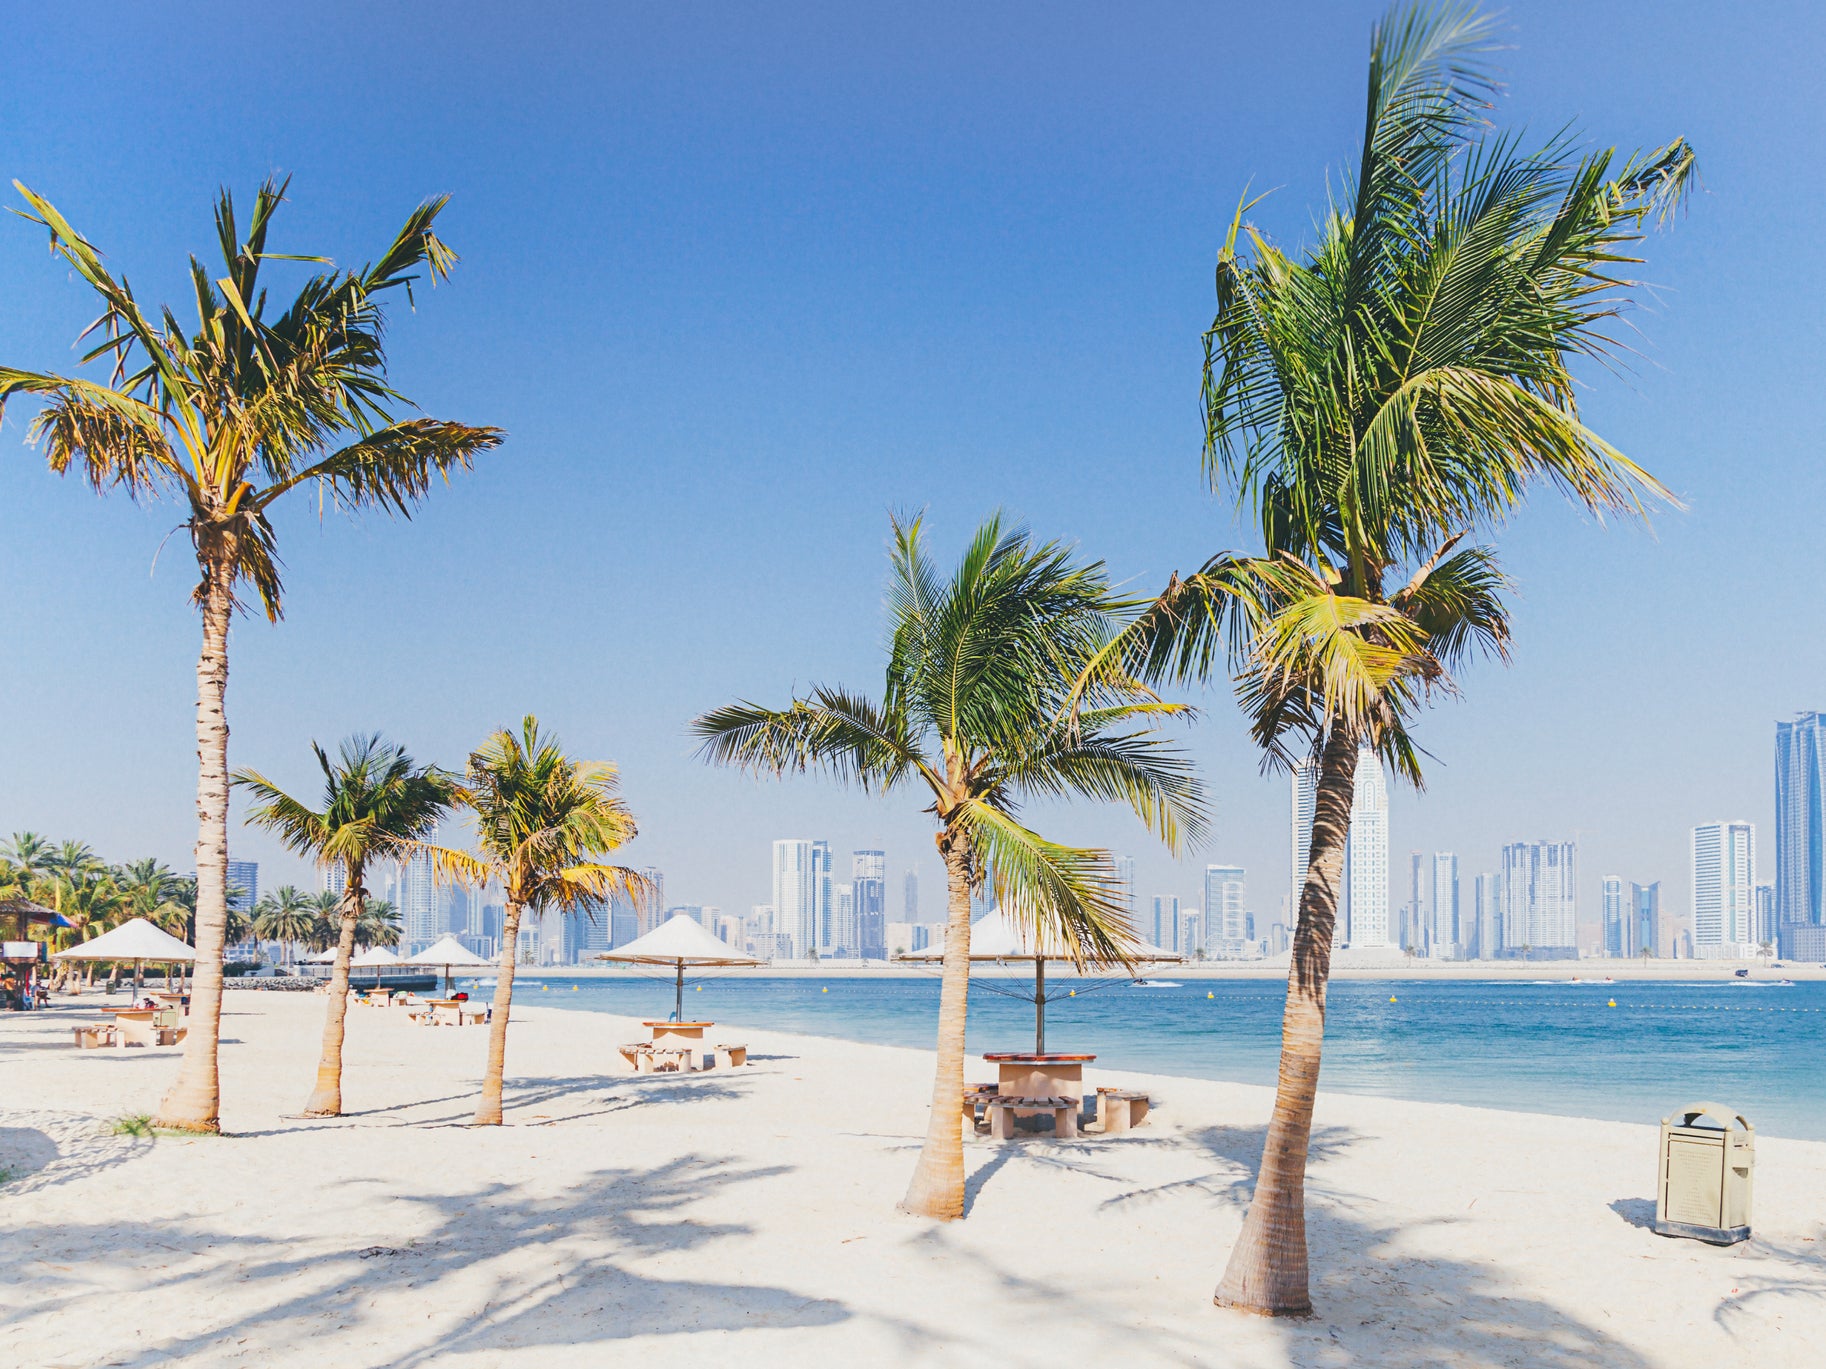 The Dubai Islands offer a holiday spot outside the main city centre